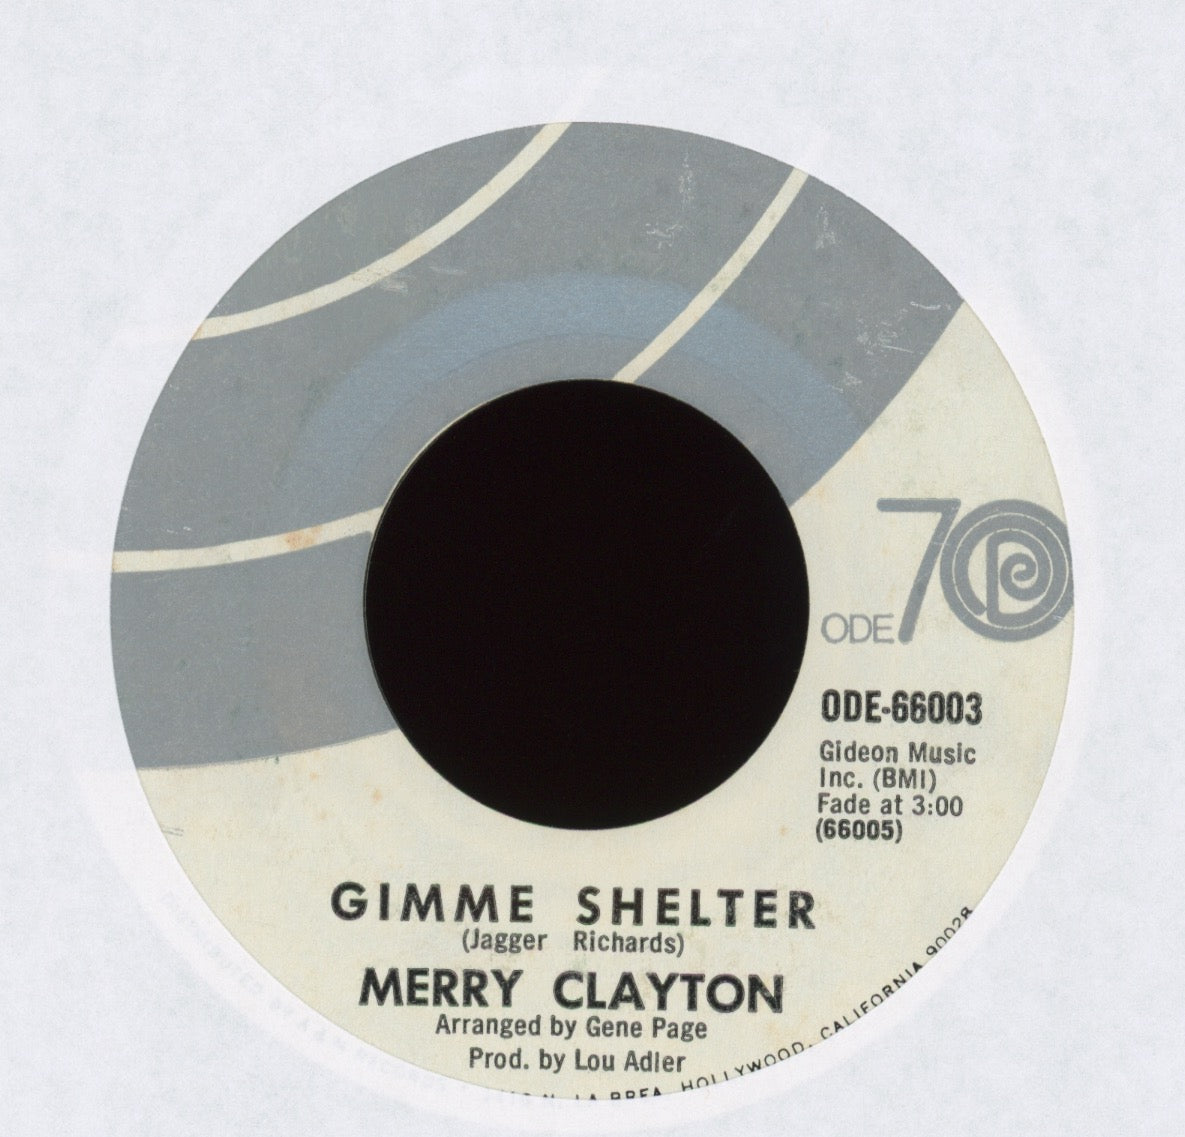 Merry Clayton - Gimme Shelter on Ode